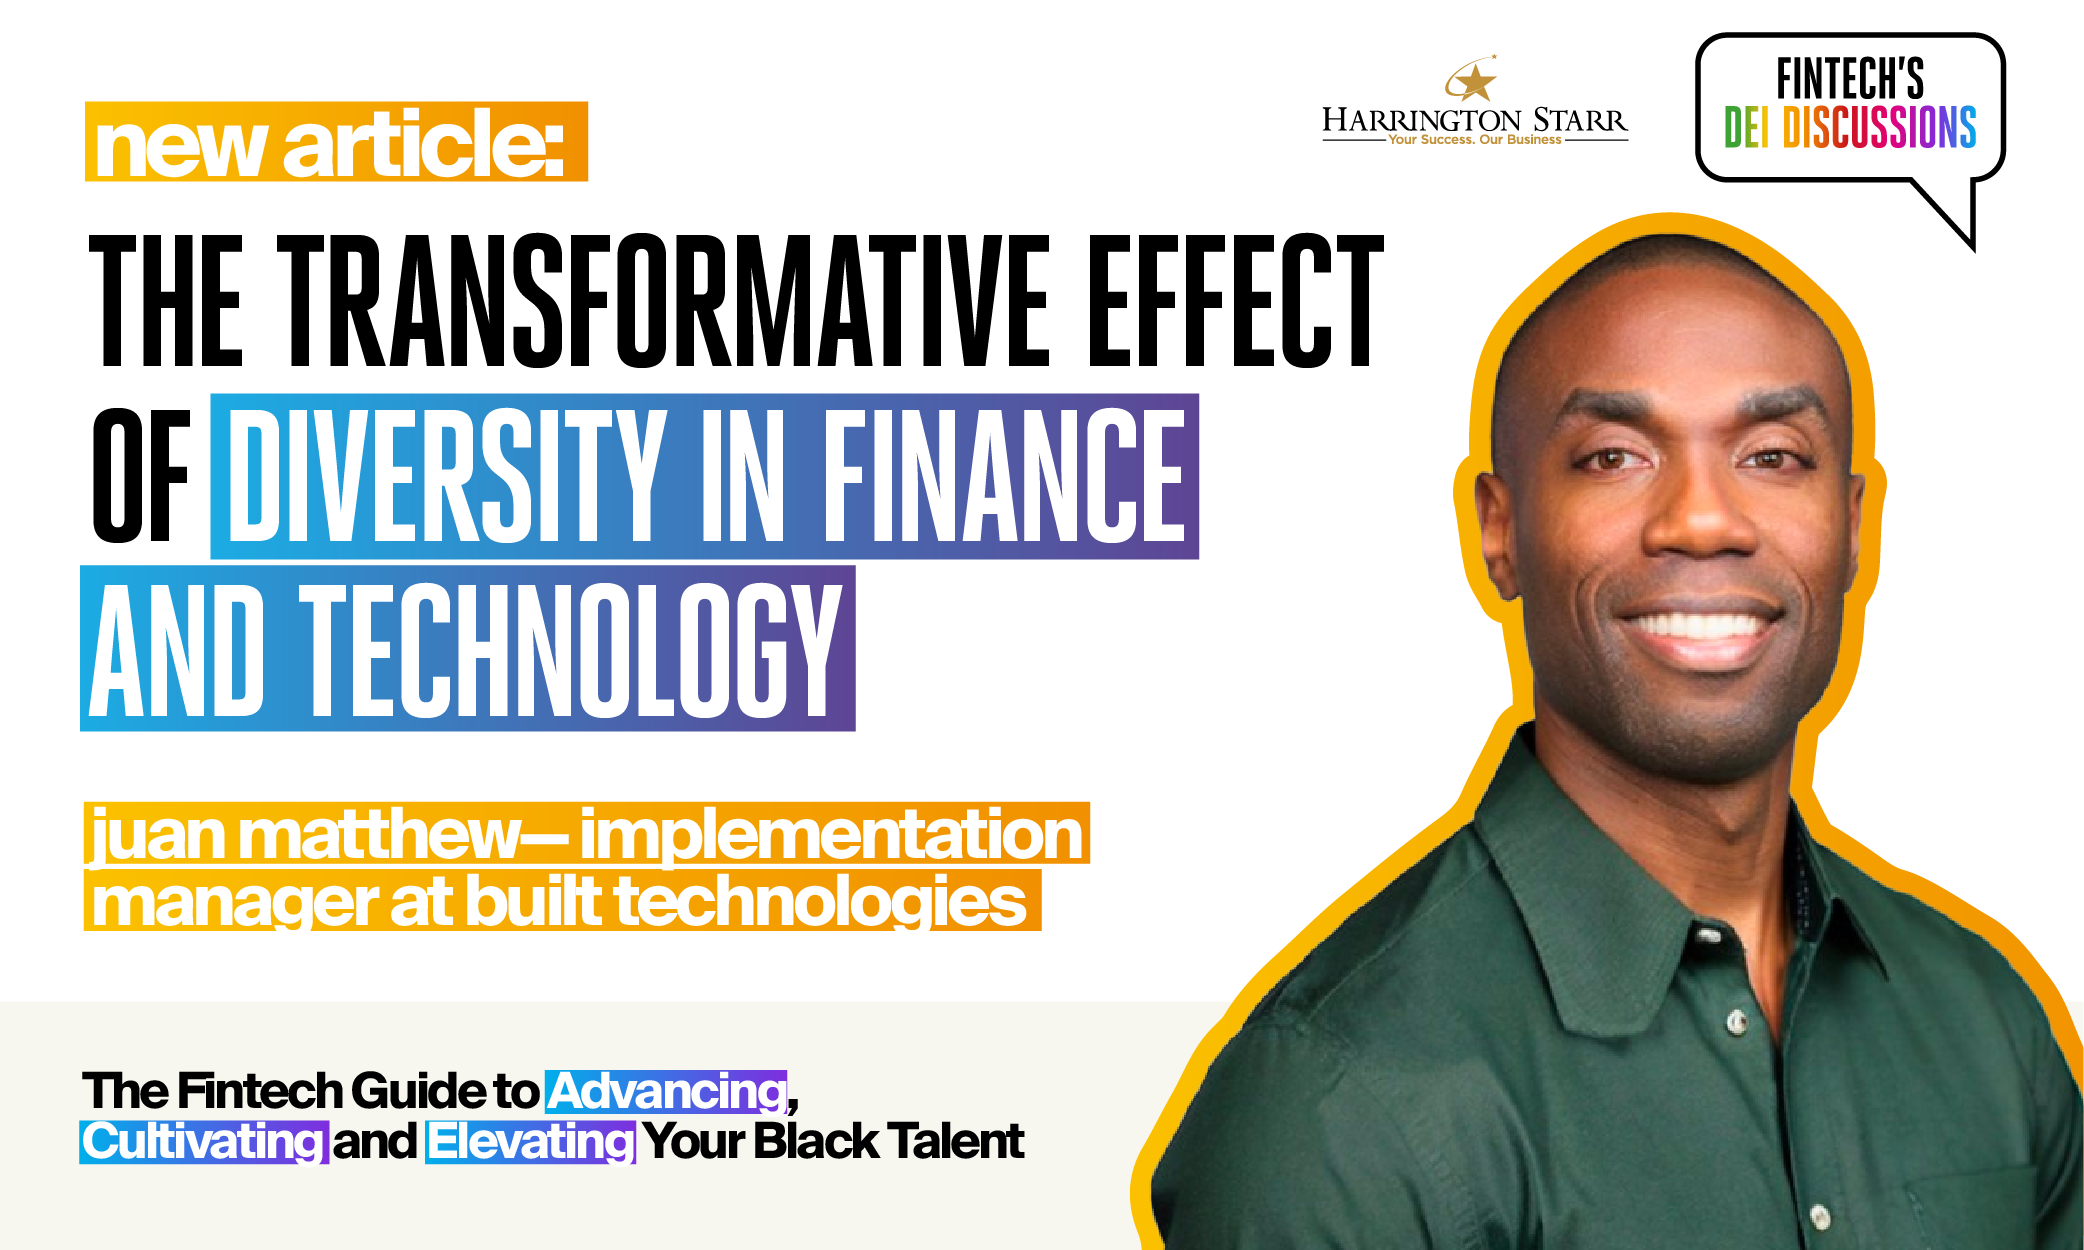 The Transformative Effect of Diversity in Finance and Technology